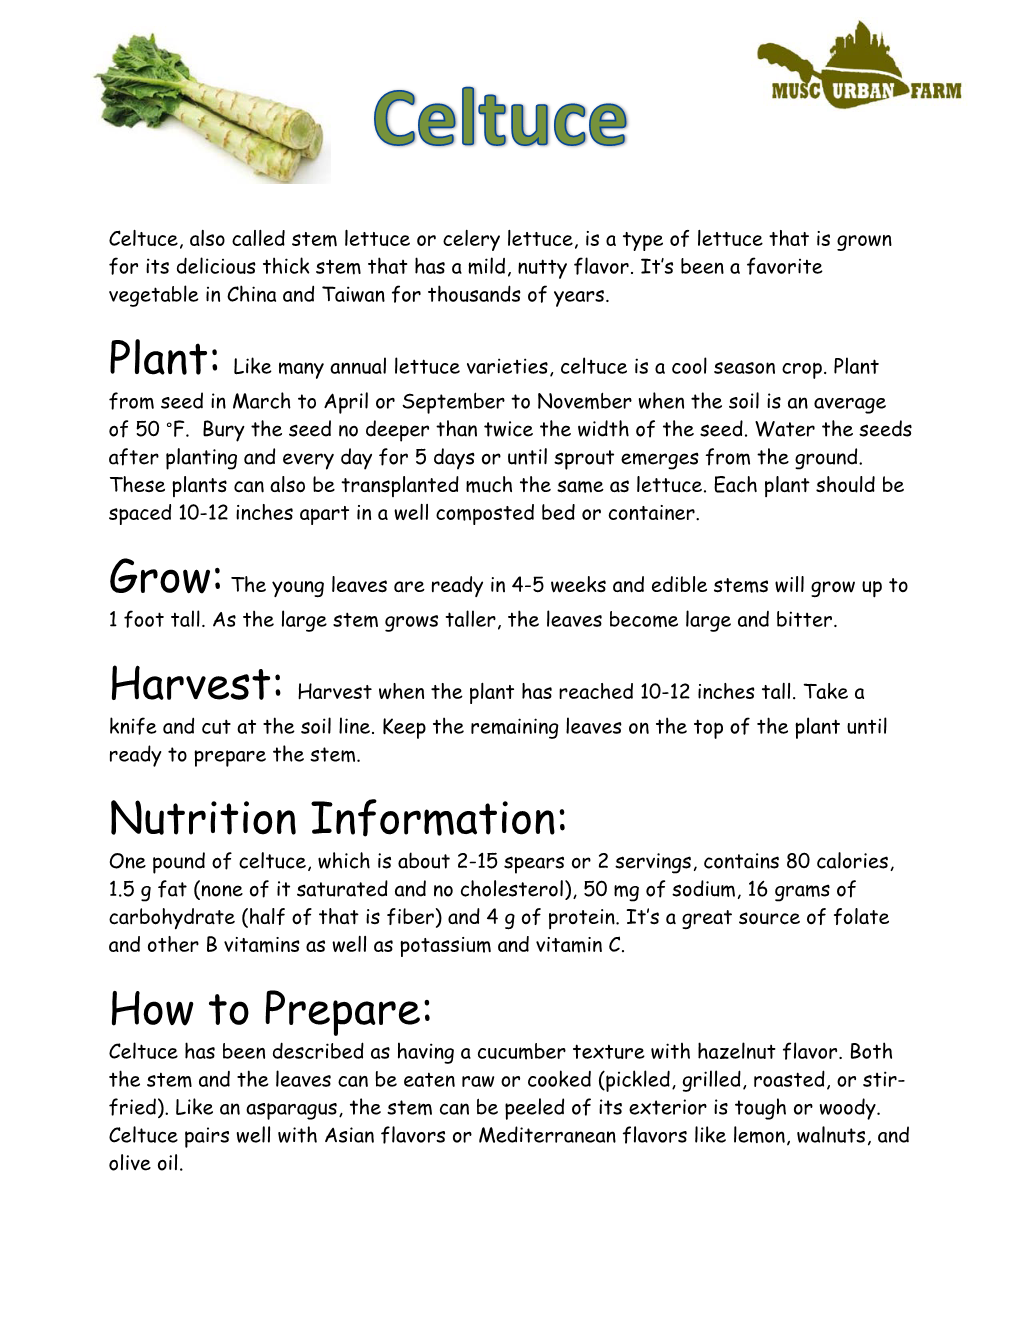 Nutrition Information: How to Prepare